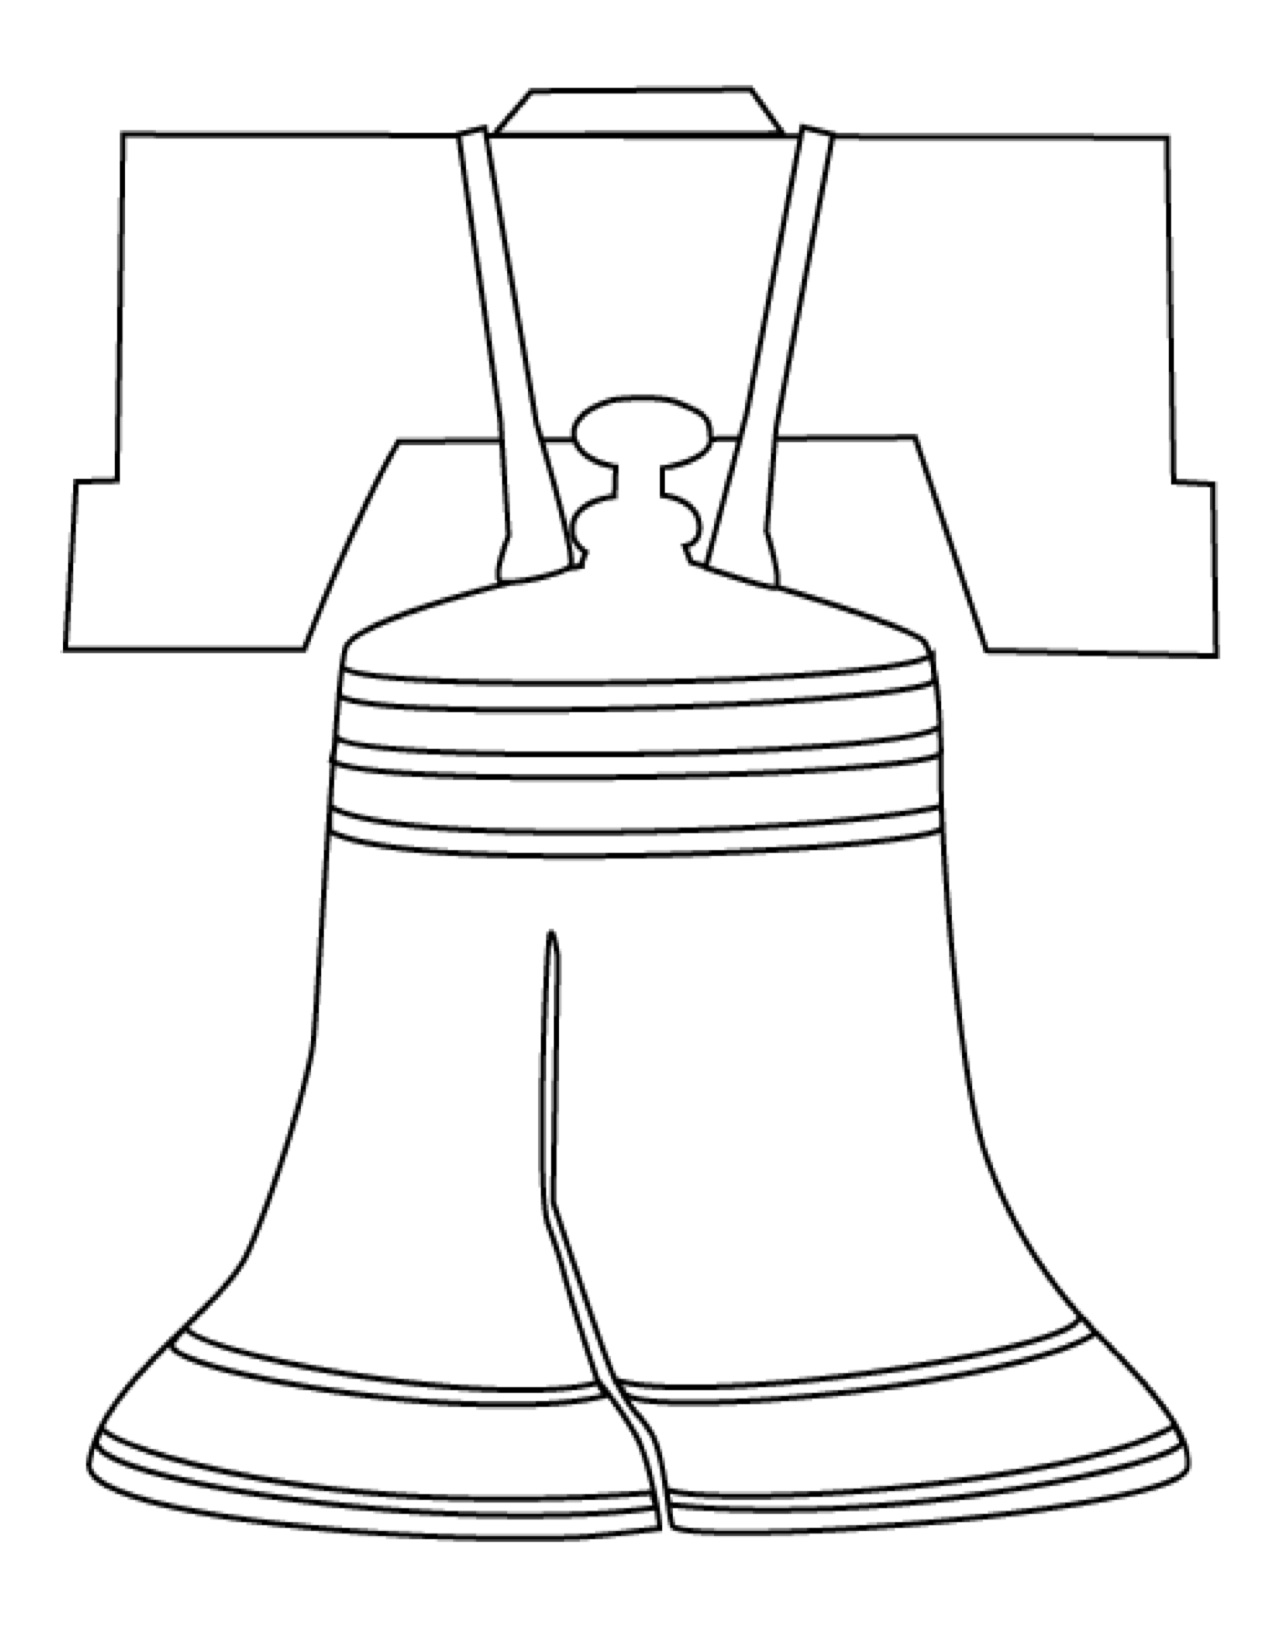 Liberty Bell Coloring Page